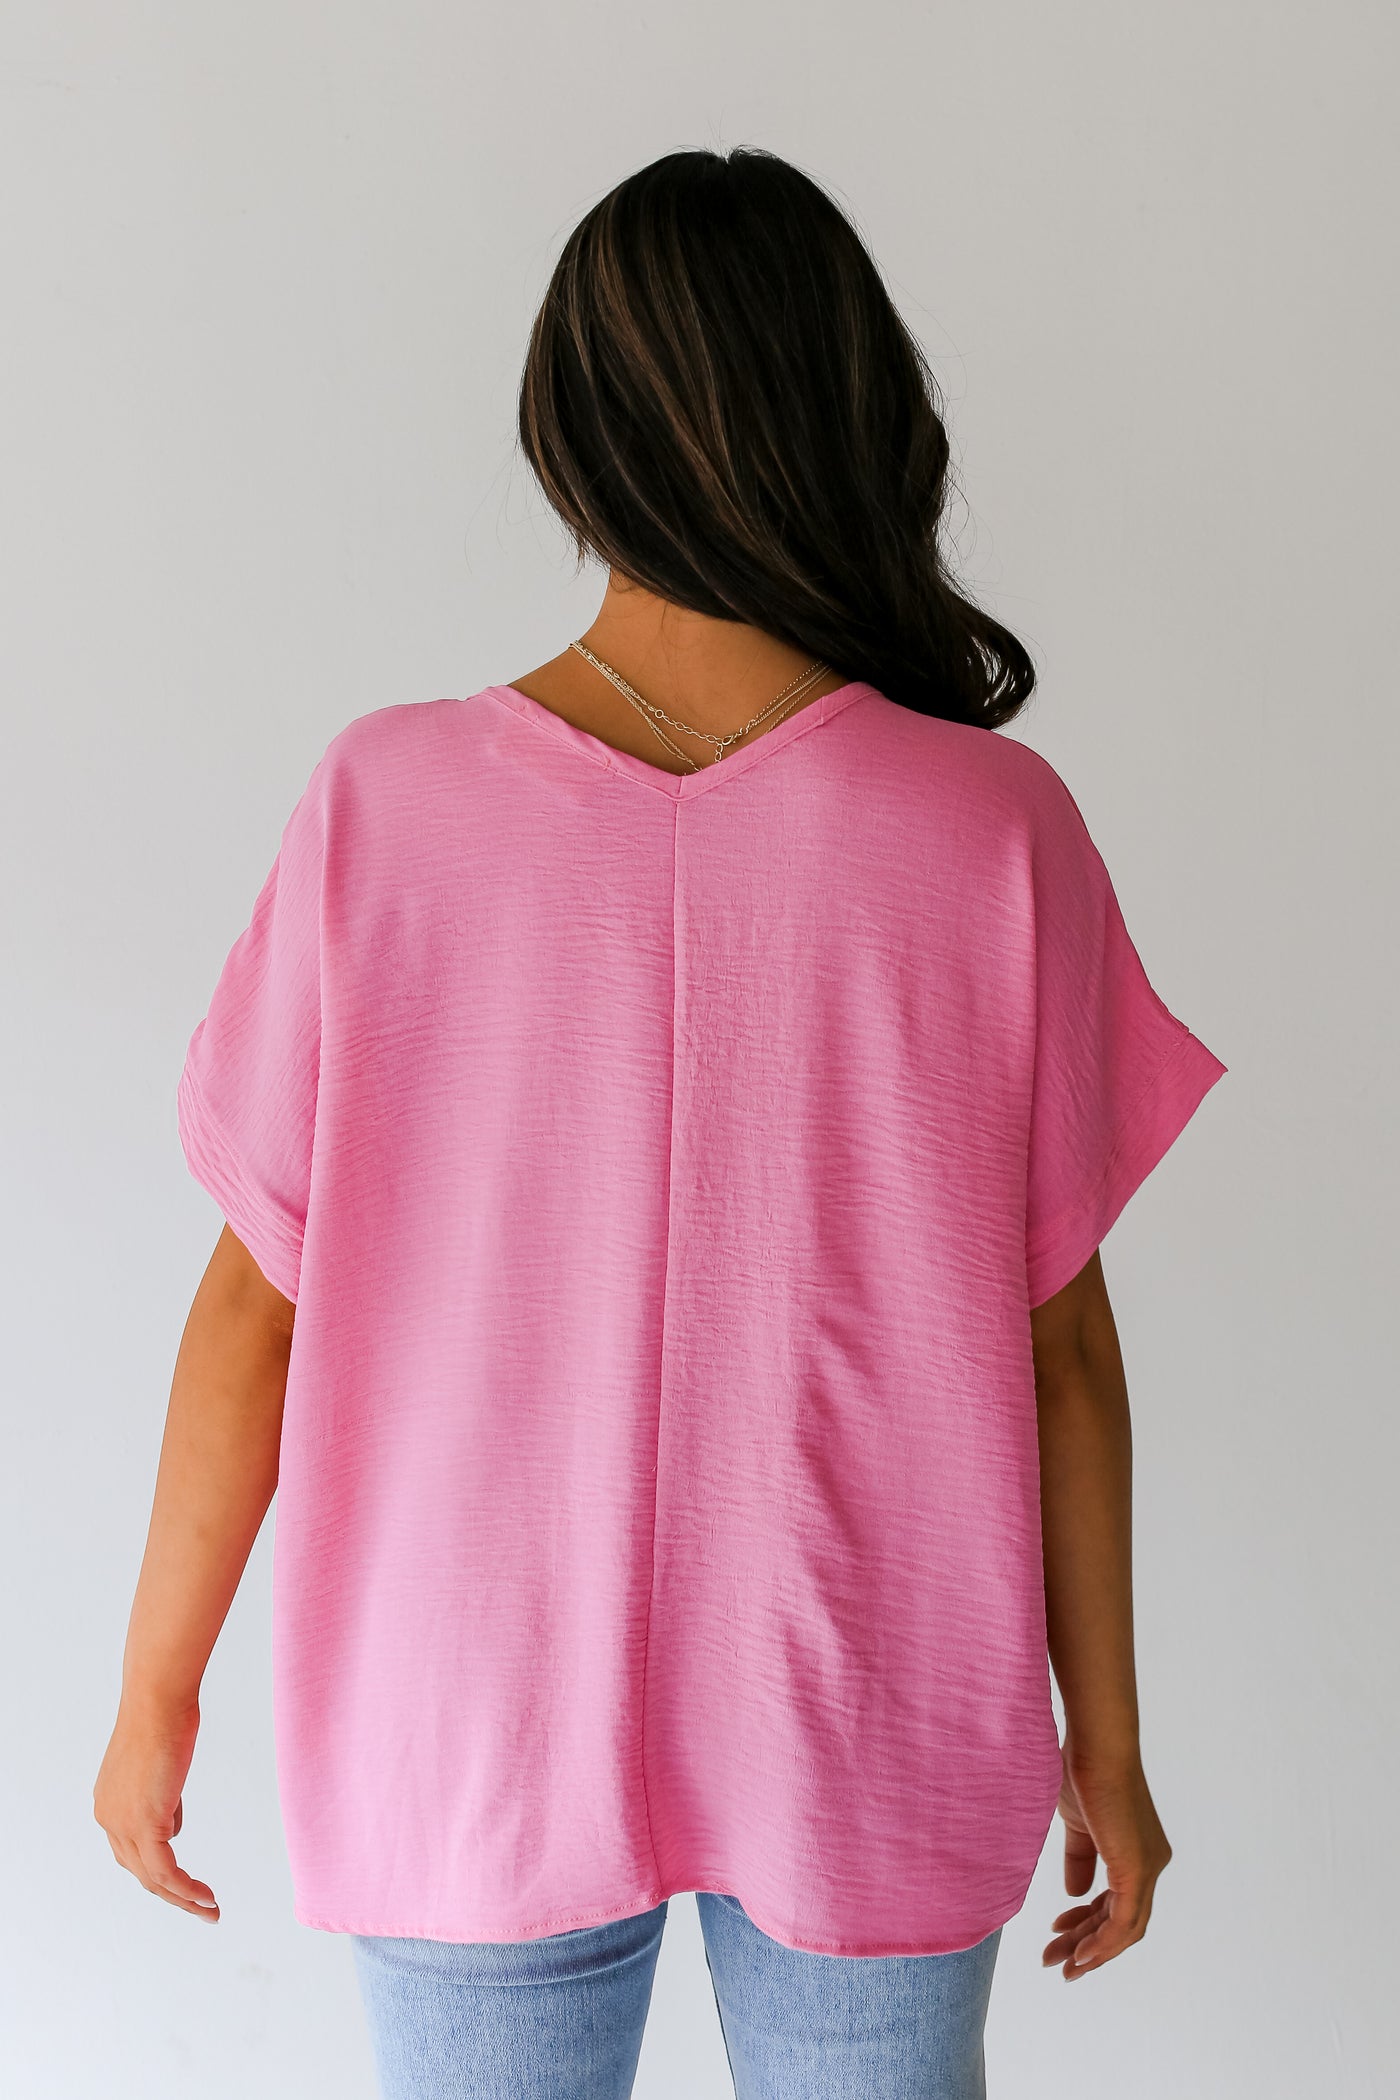 pink Blouse back view